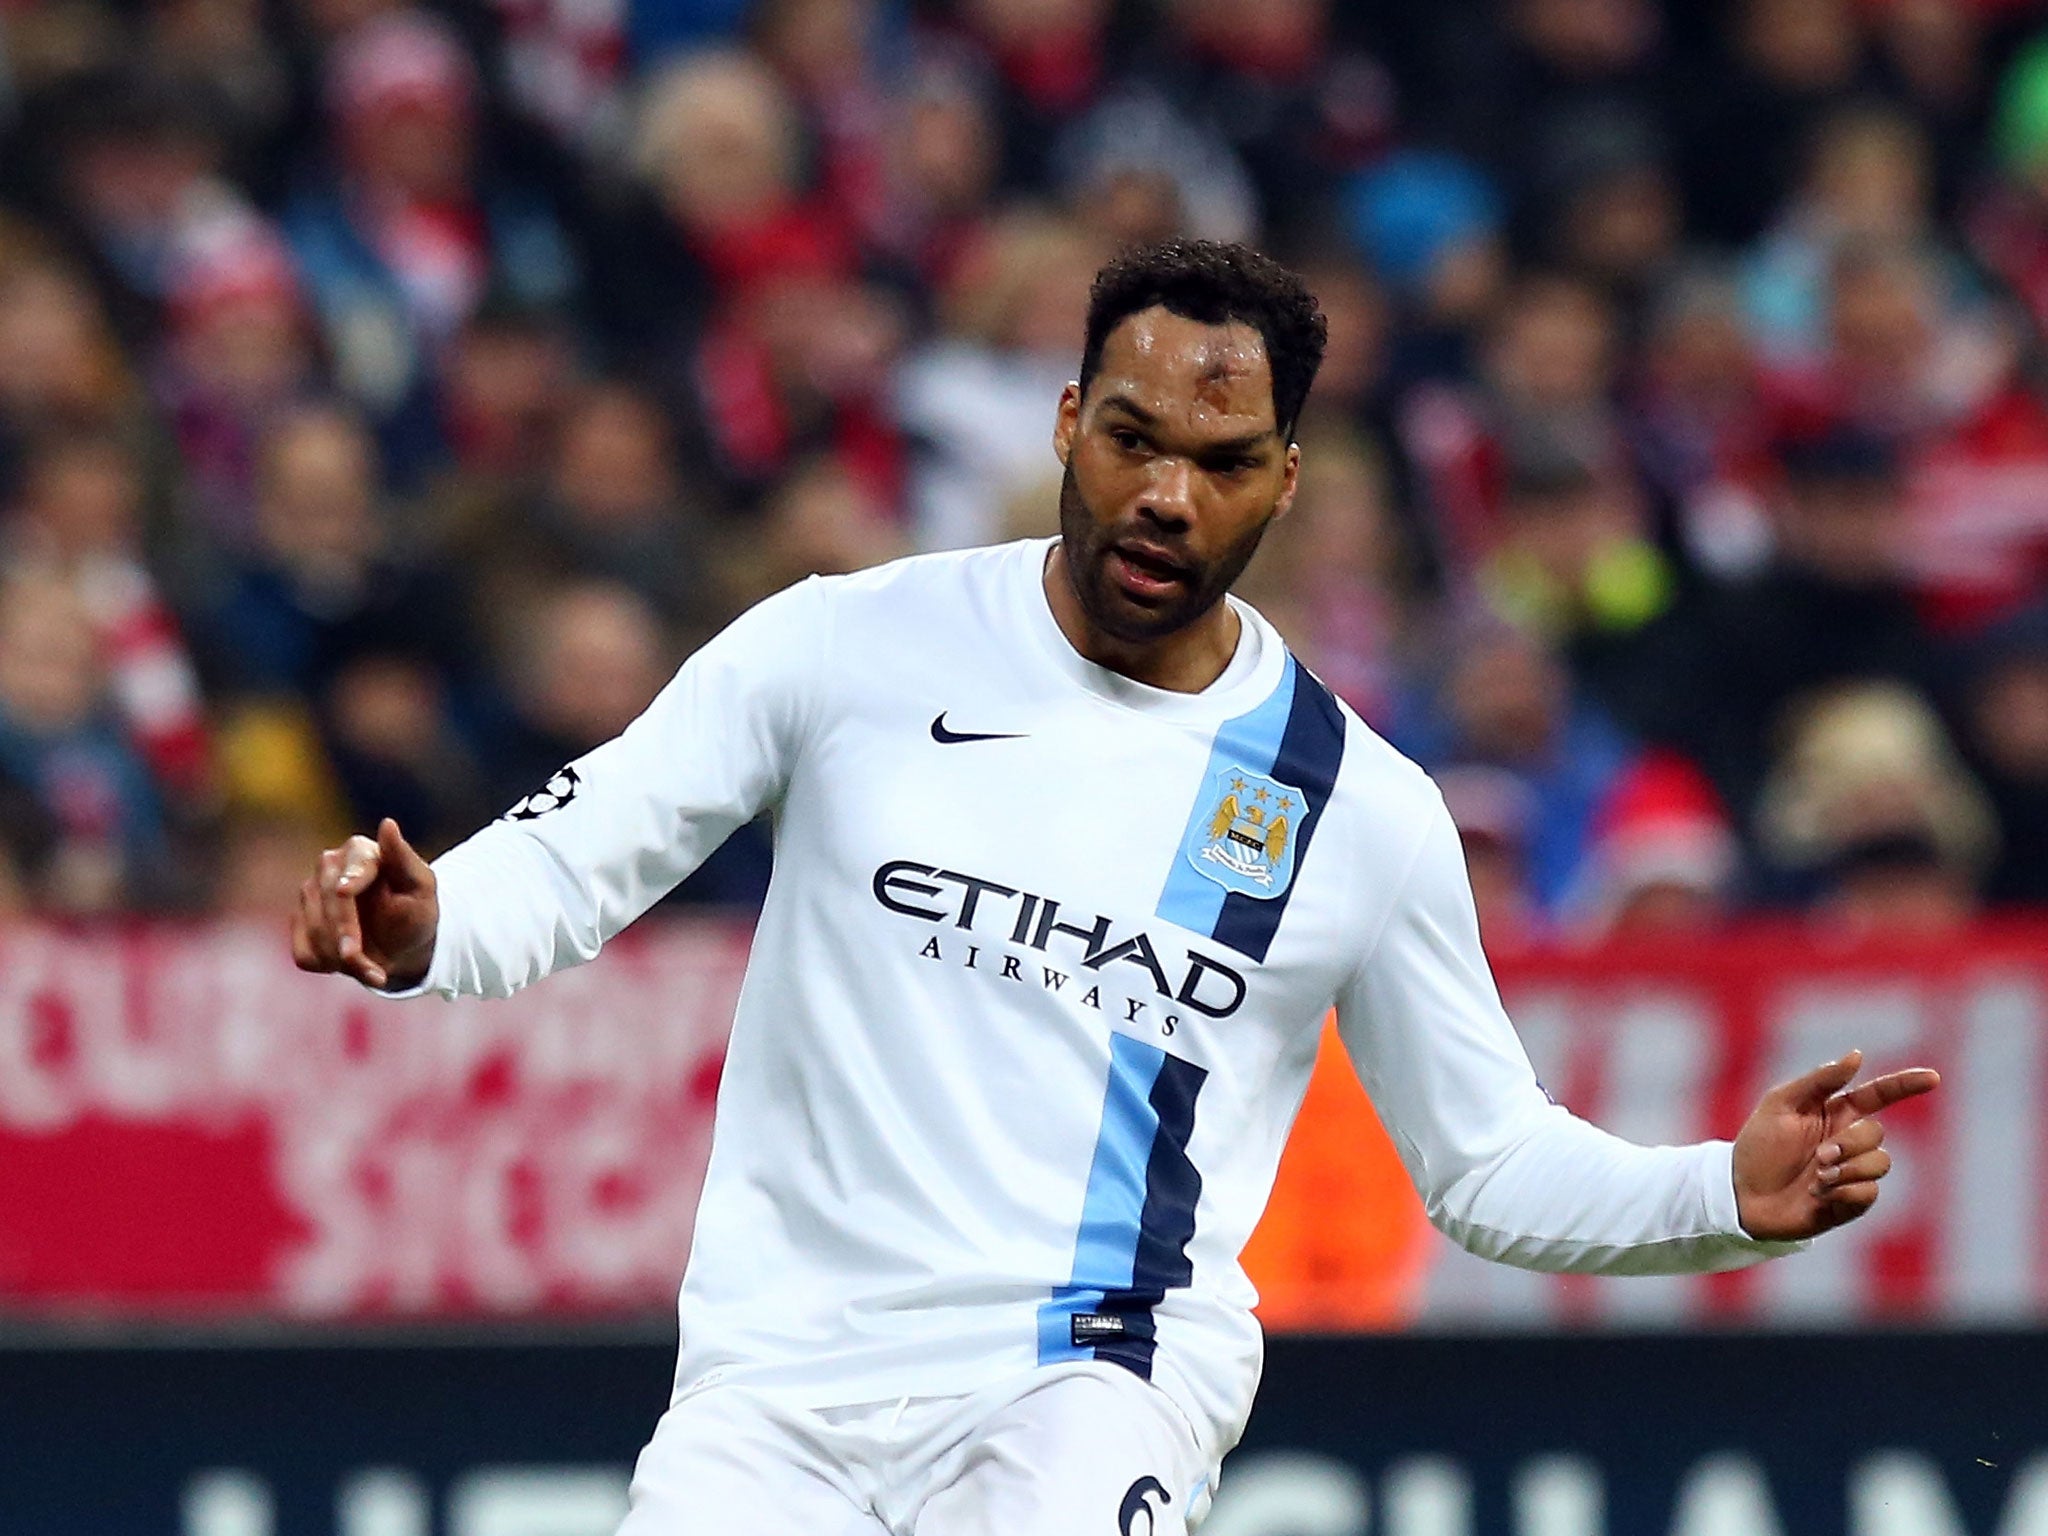 Manchester City defender Joleon Lescott has reportedly been told that he is free to leave Manchester City on loan for the remainder of the season